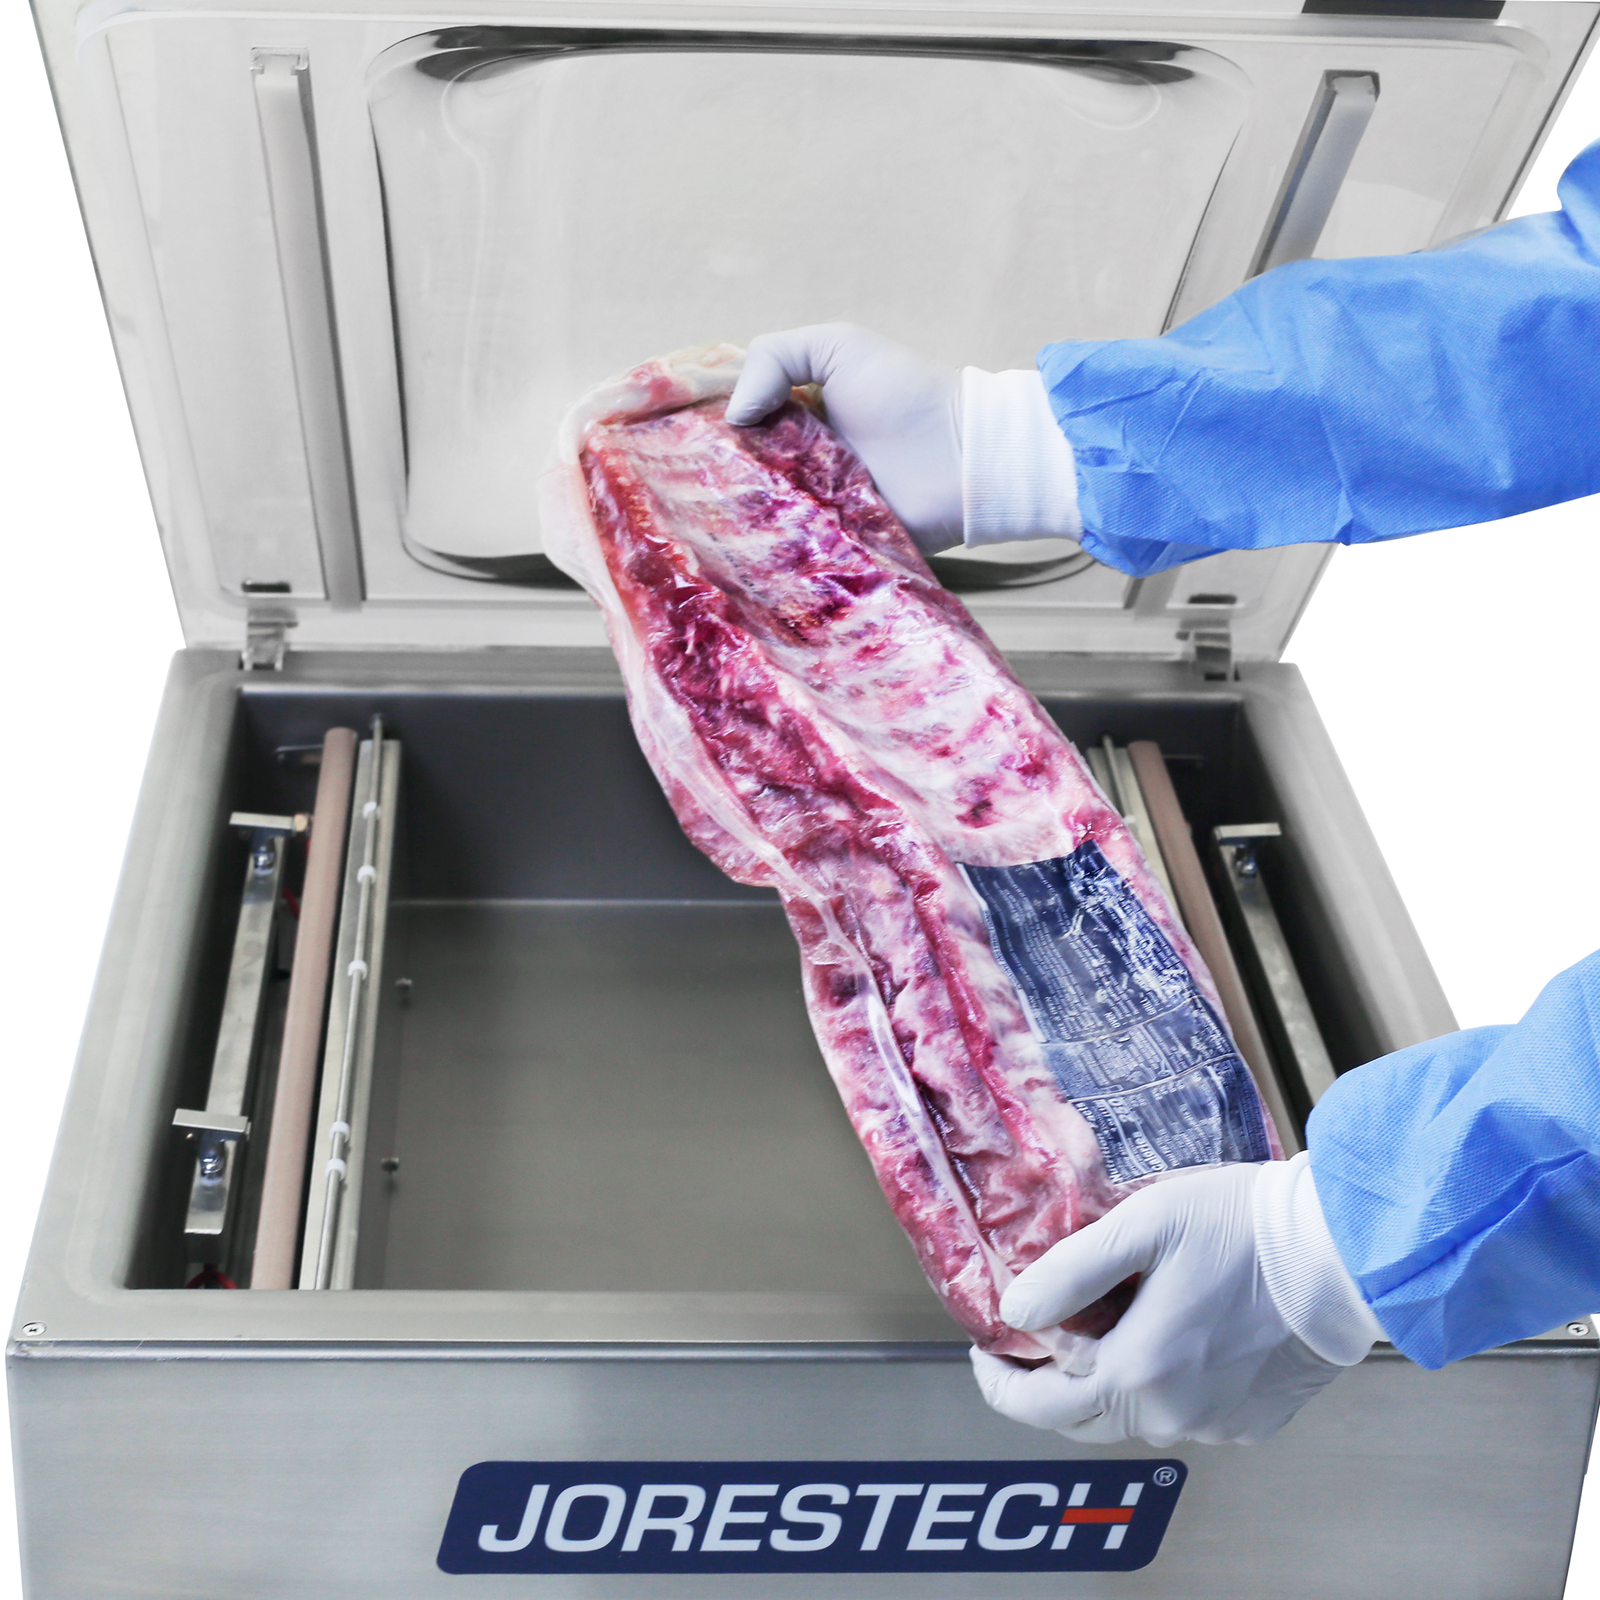 Person wearing disposable gloves and clothing. He is holding a large rack of ribs after been vacuumed by the stainless steel JORESTECH tabletop commercial single chamber vacuum sealer with dual seal bar in the background